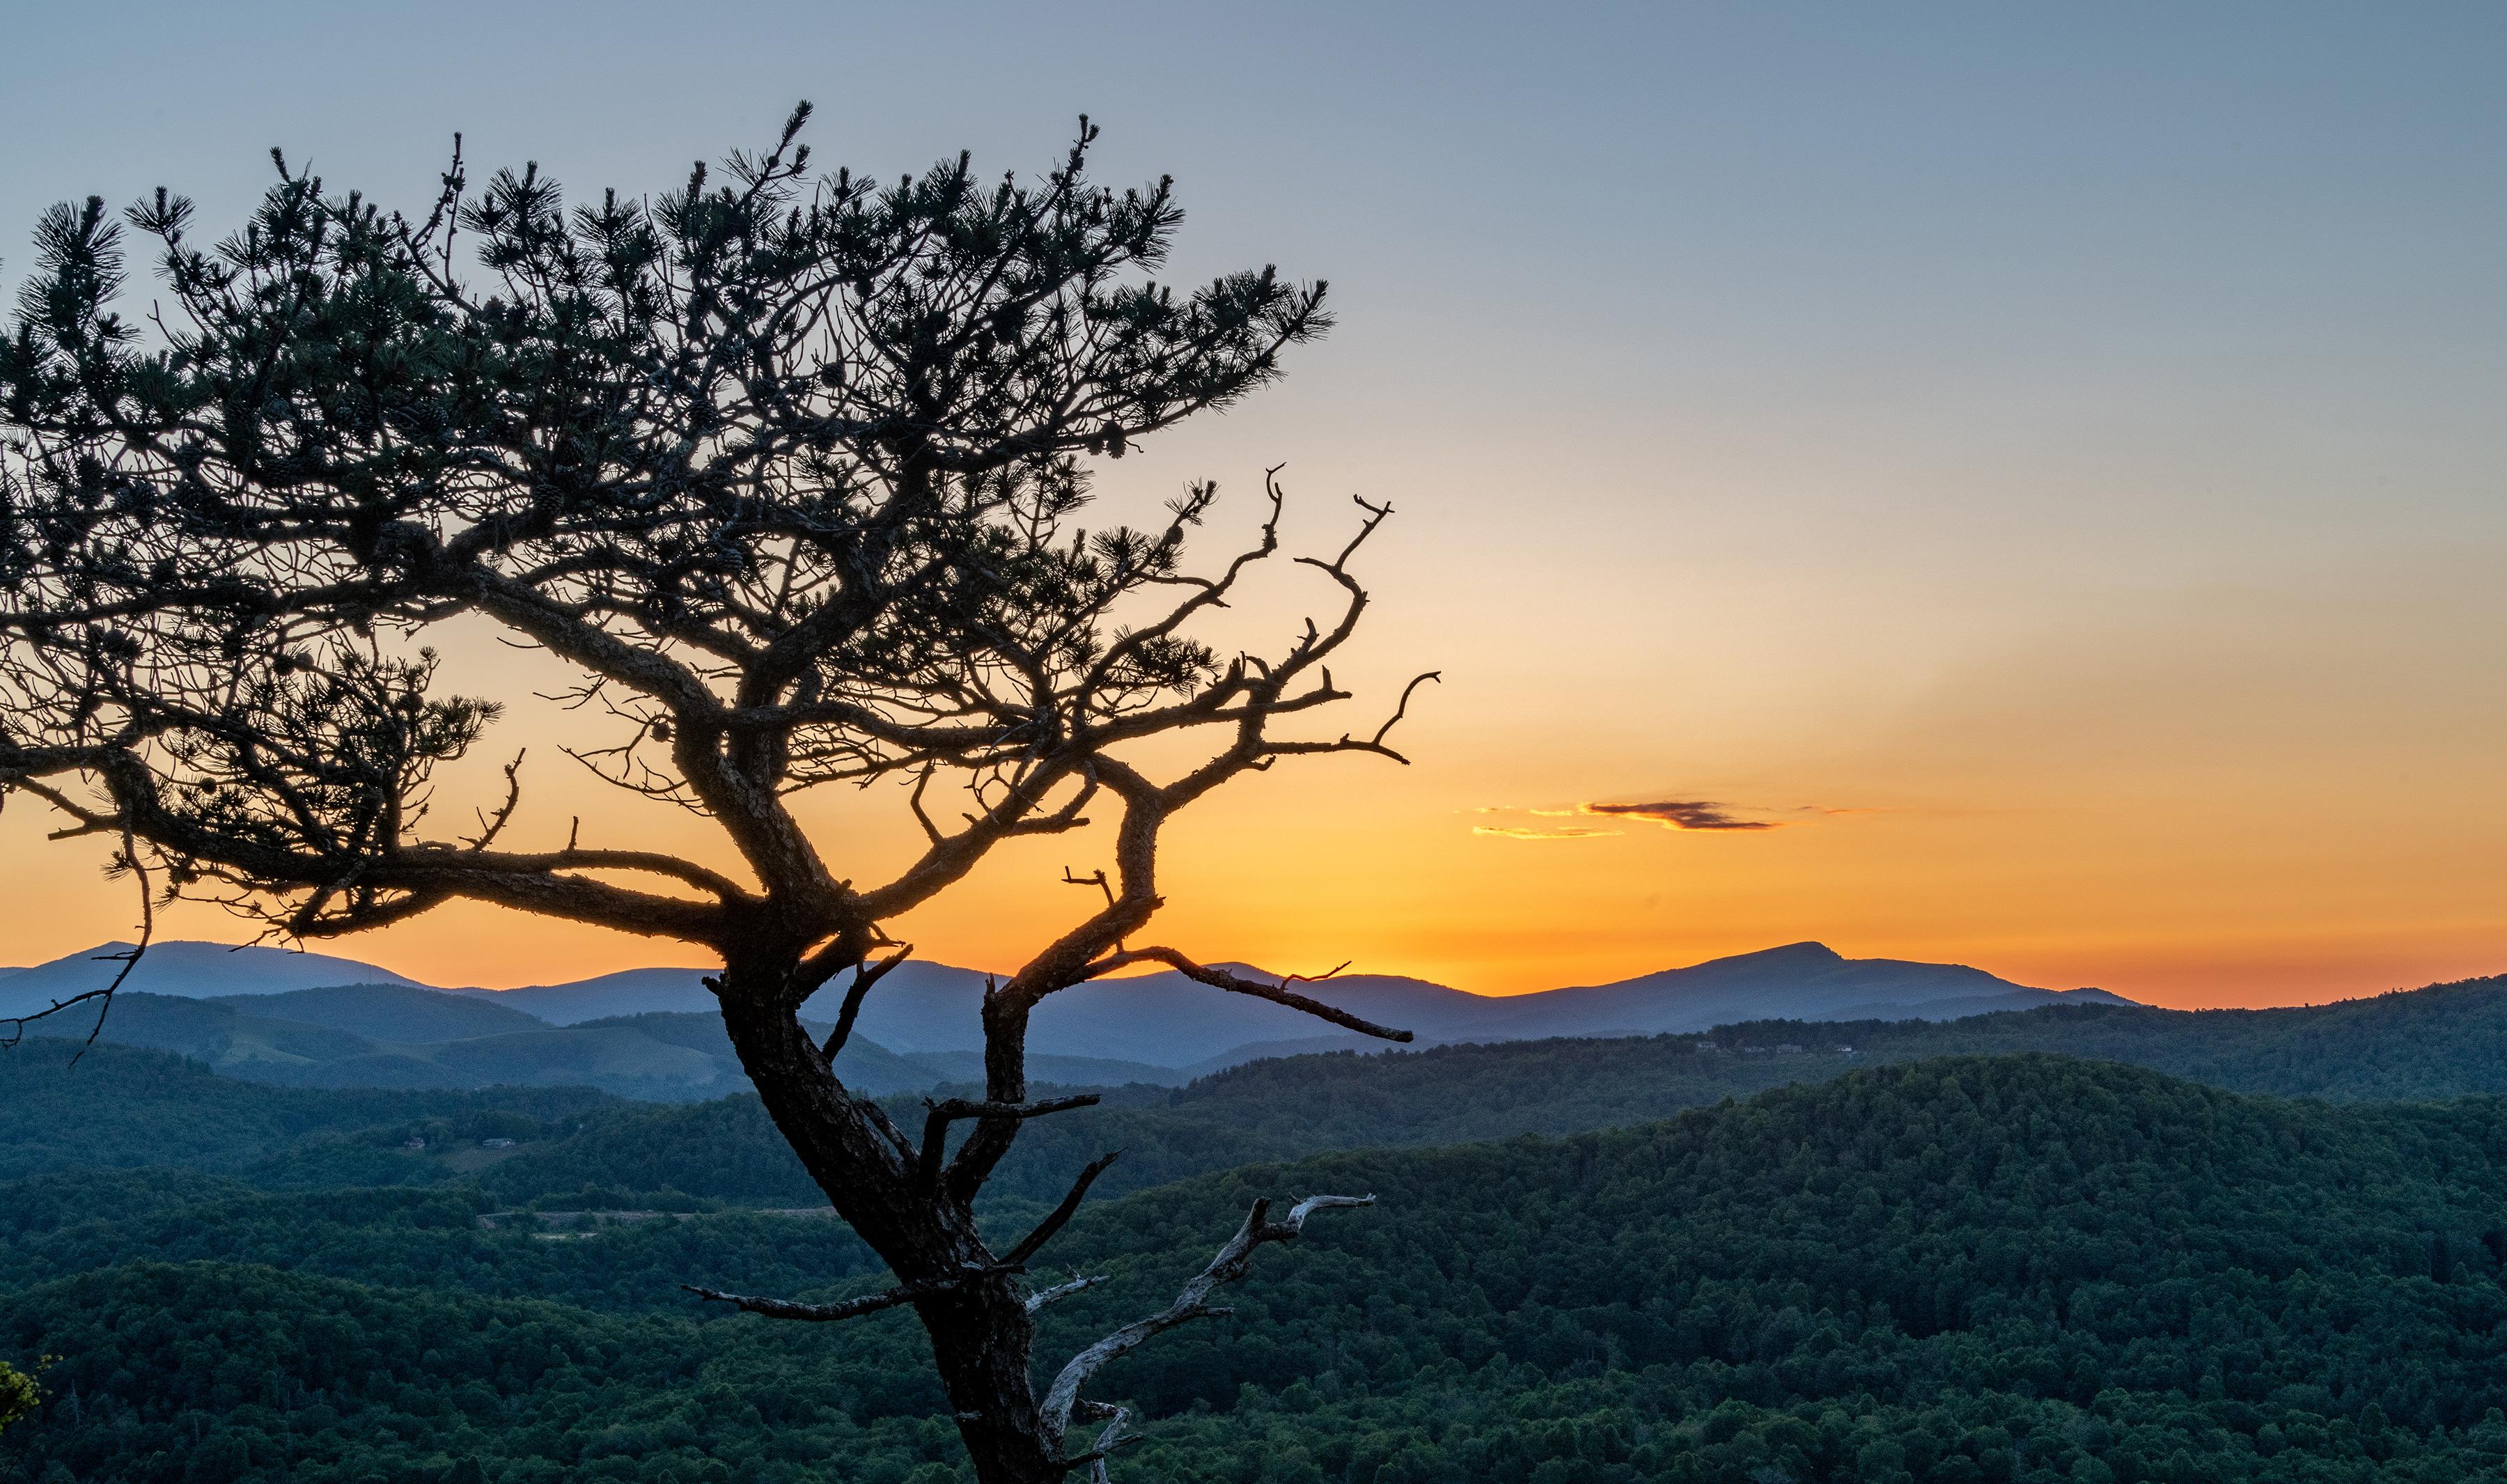 A long pine tree stands in front of distant mountain ridges beneath an orange sunset